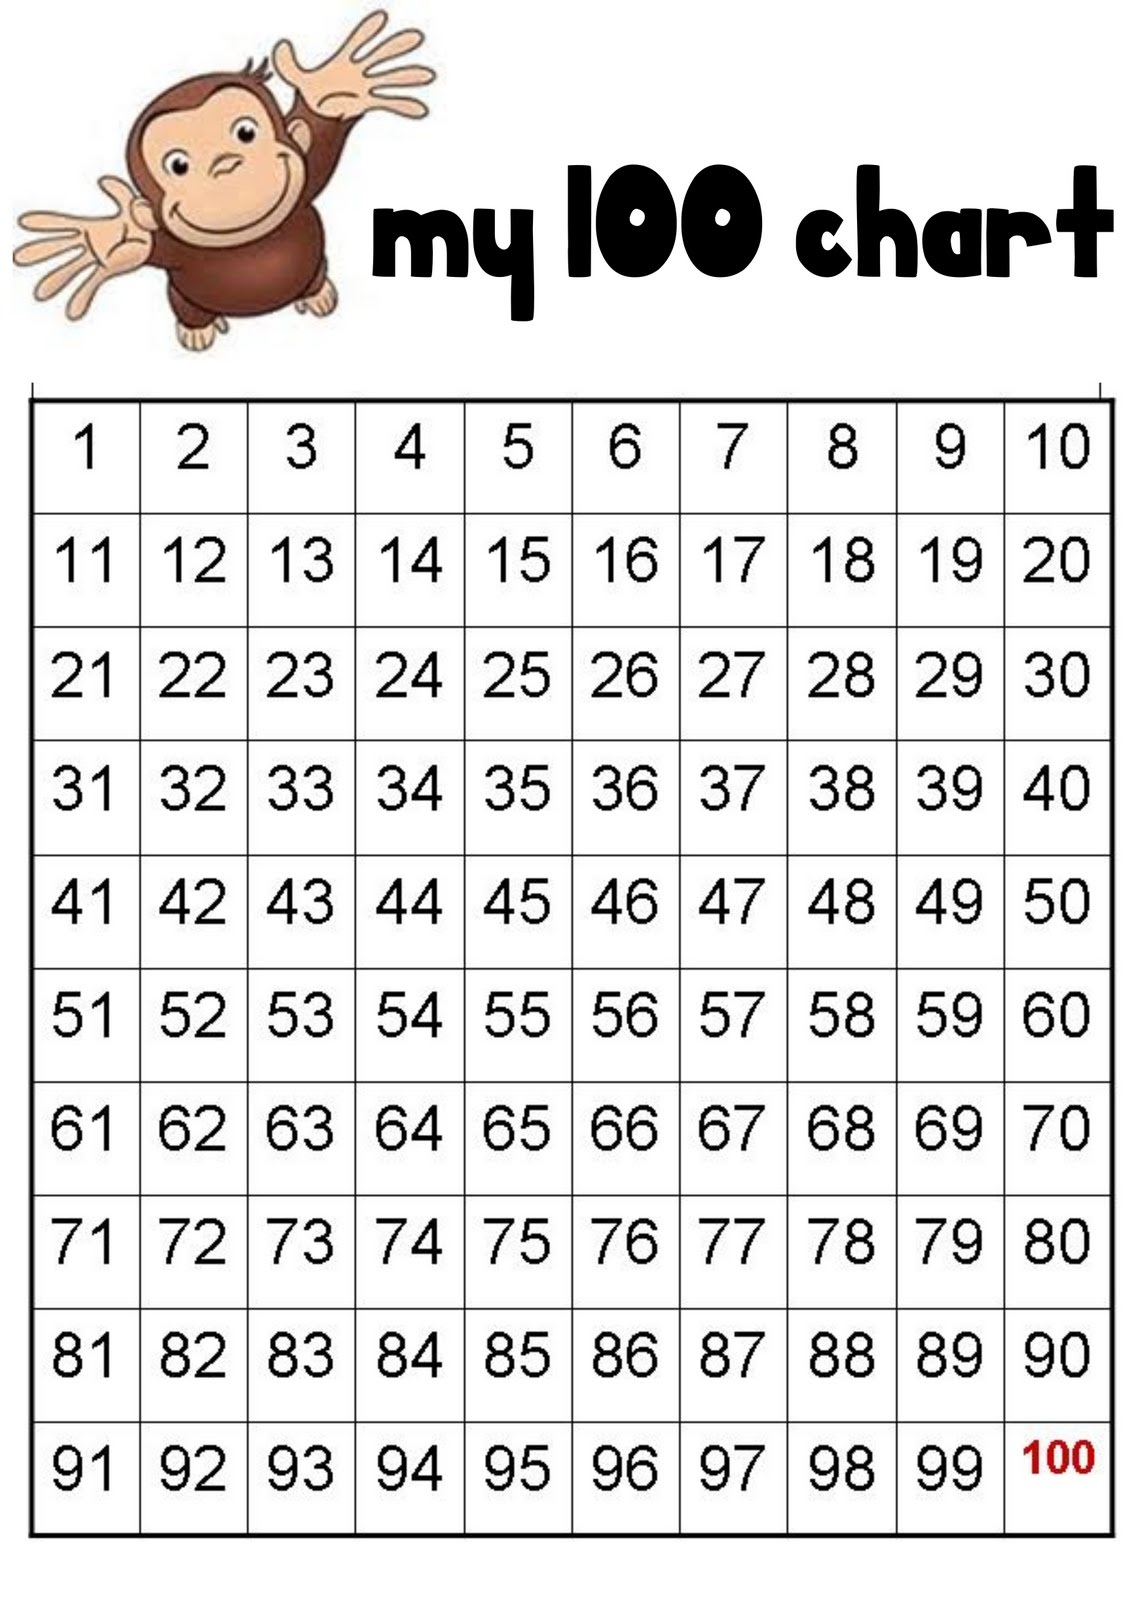 printable number chart 1 100 activity shelter printable 1 100 number